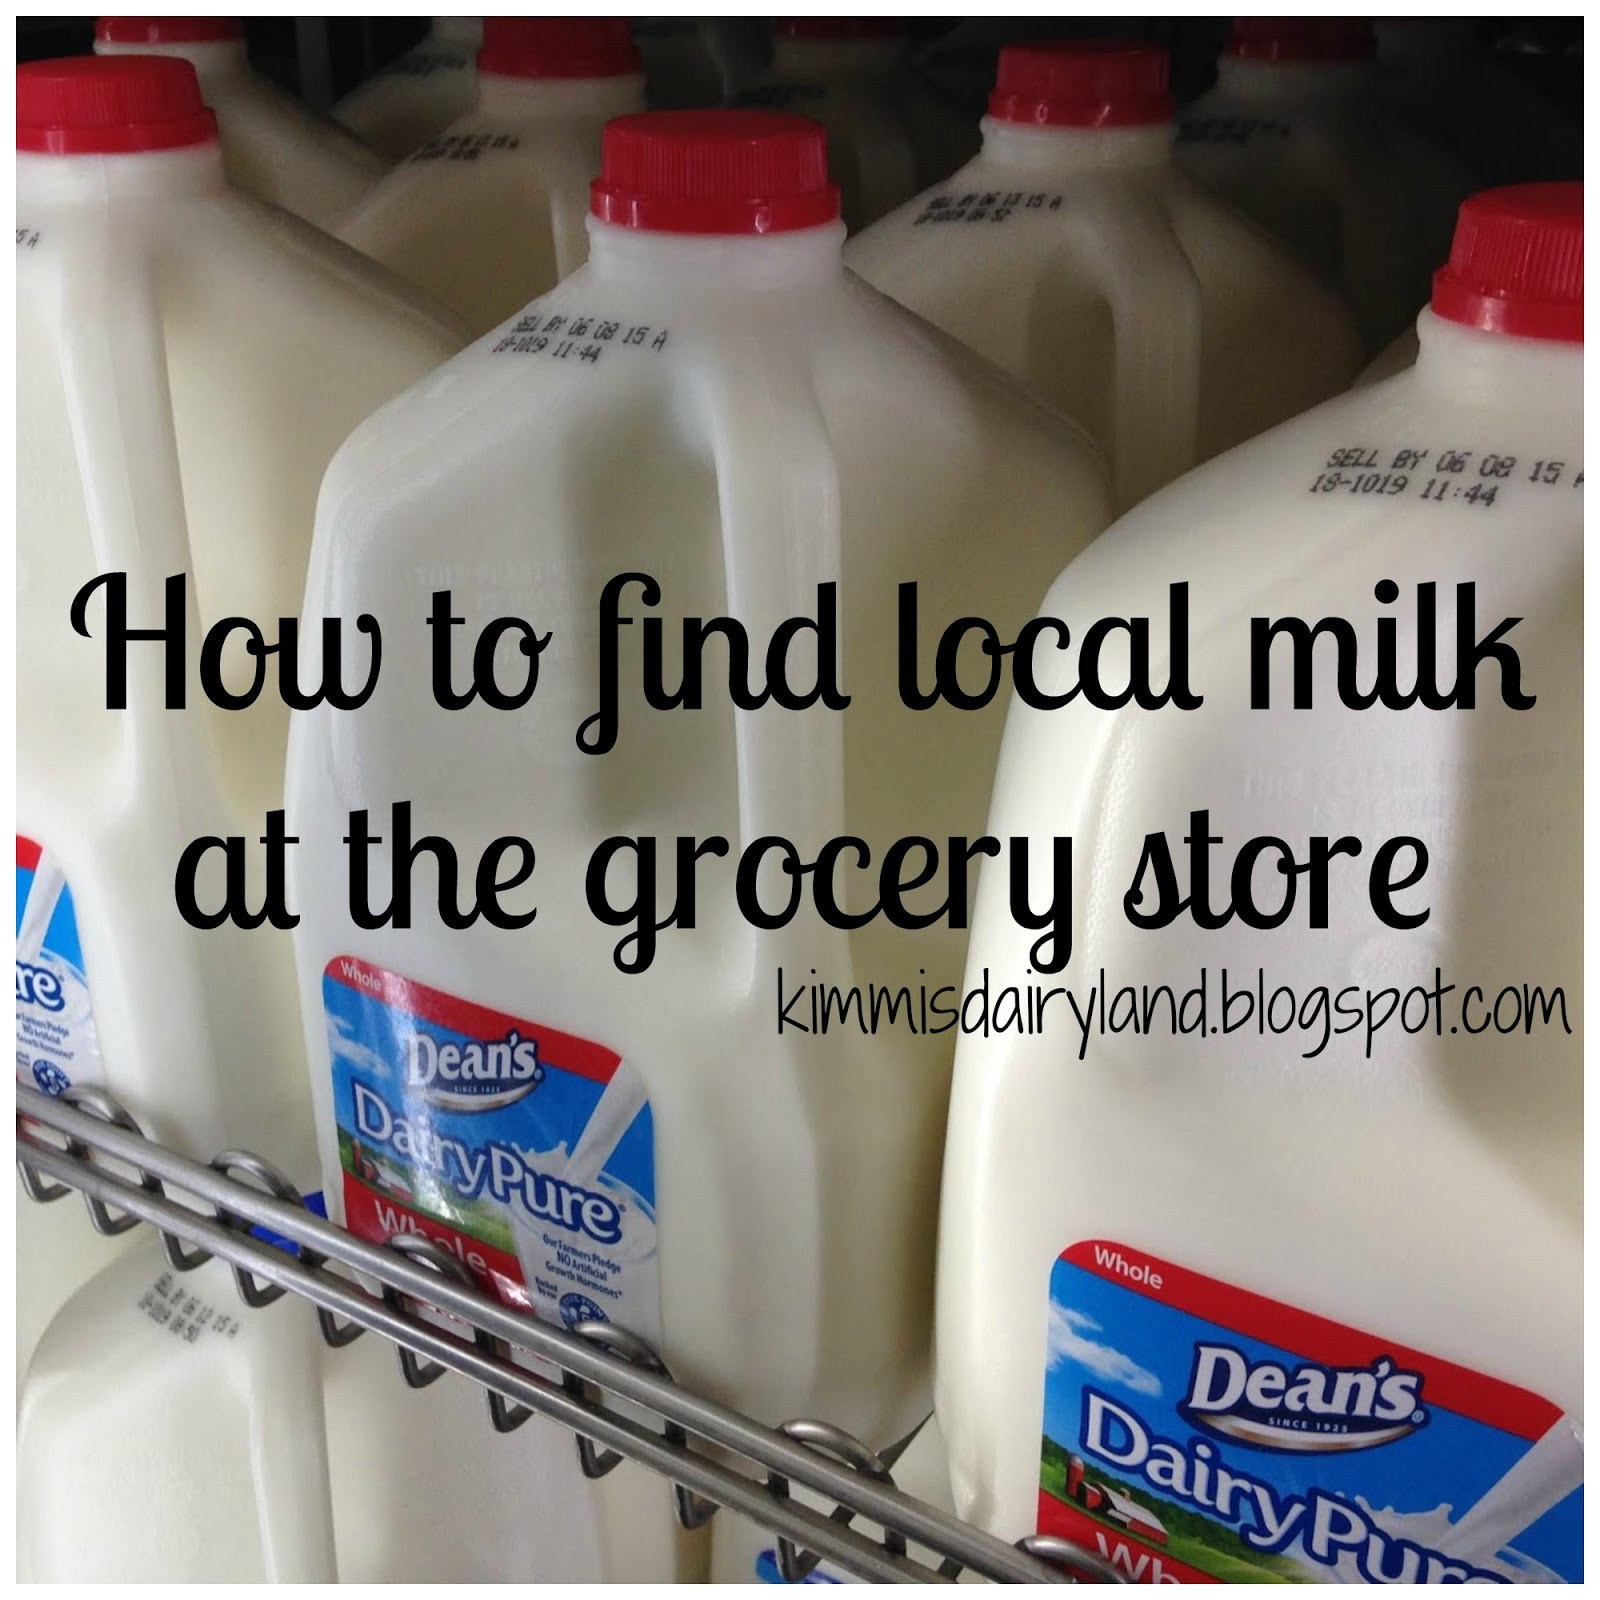 How do I know if my milk is local?